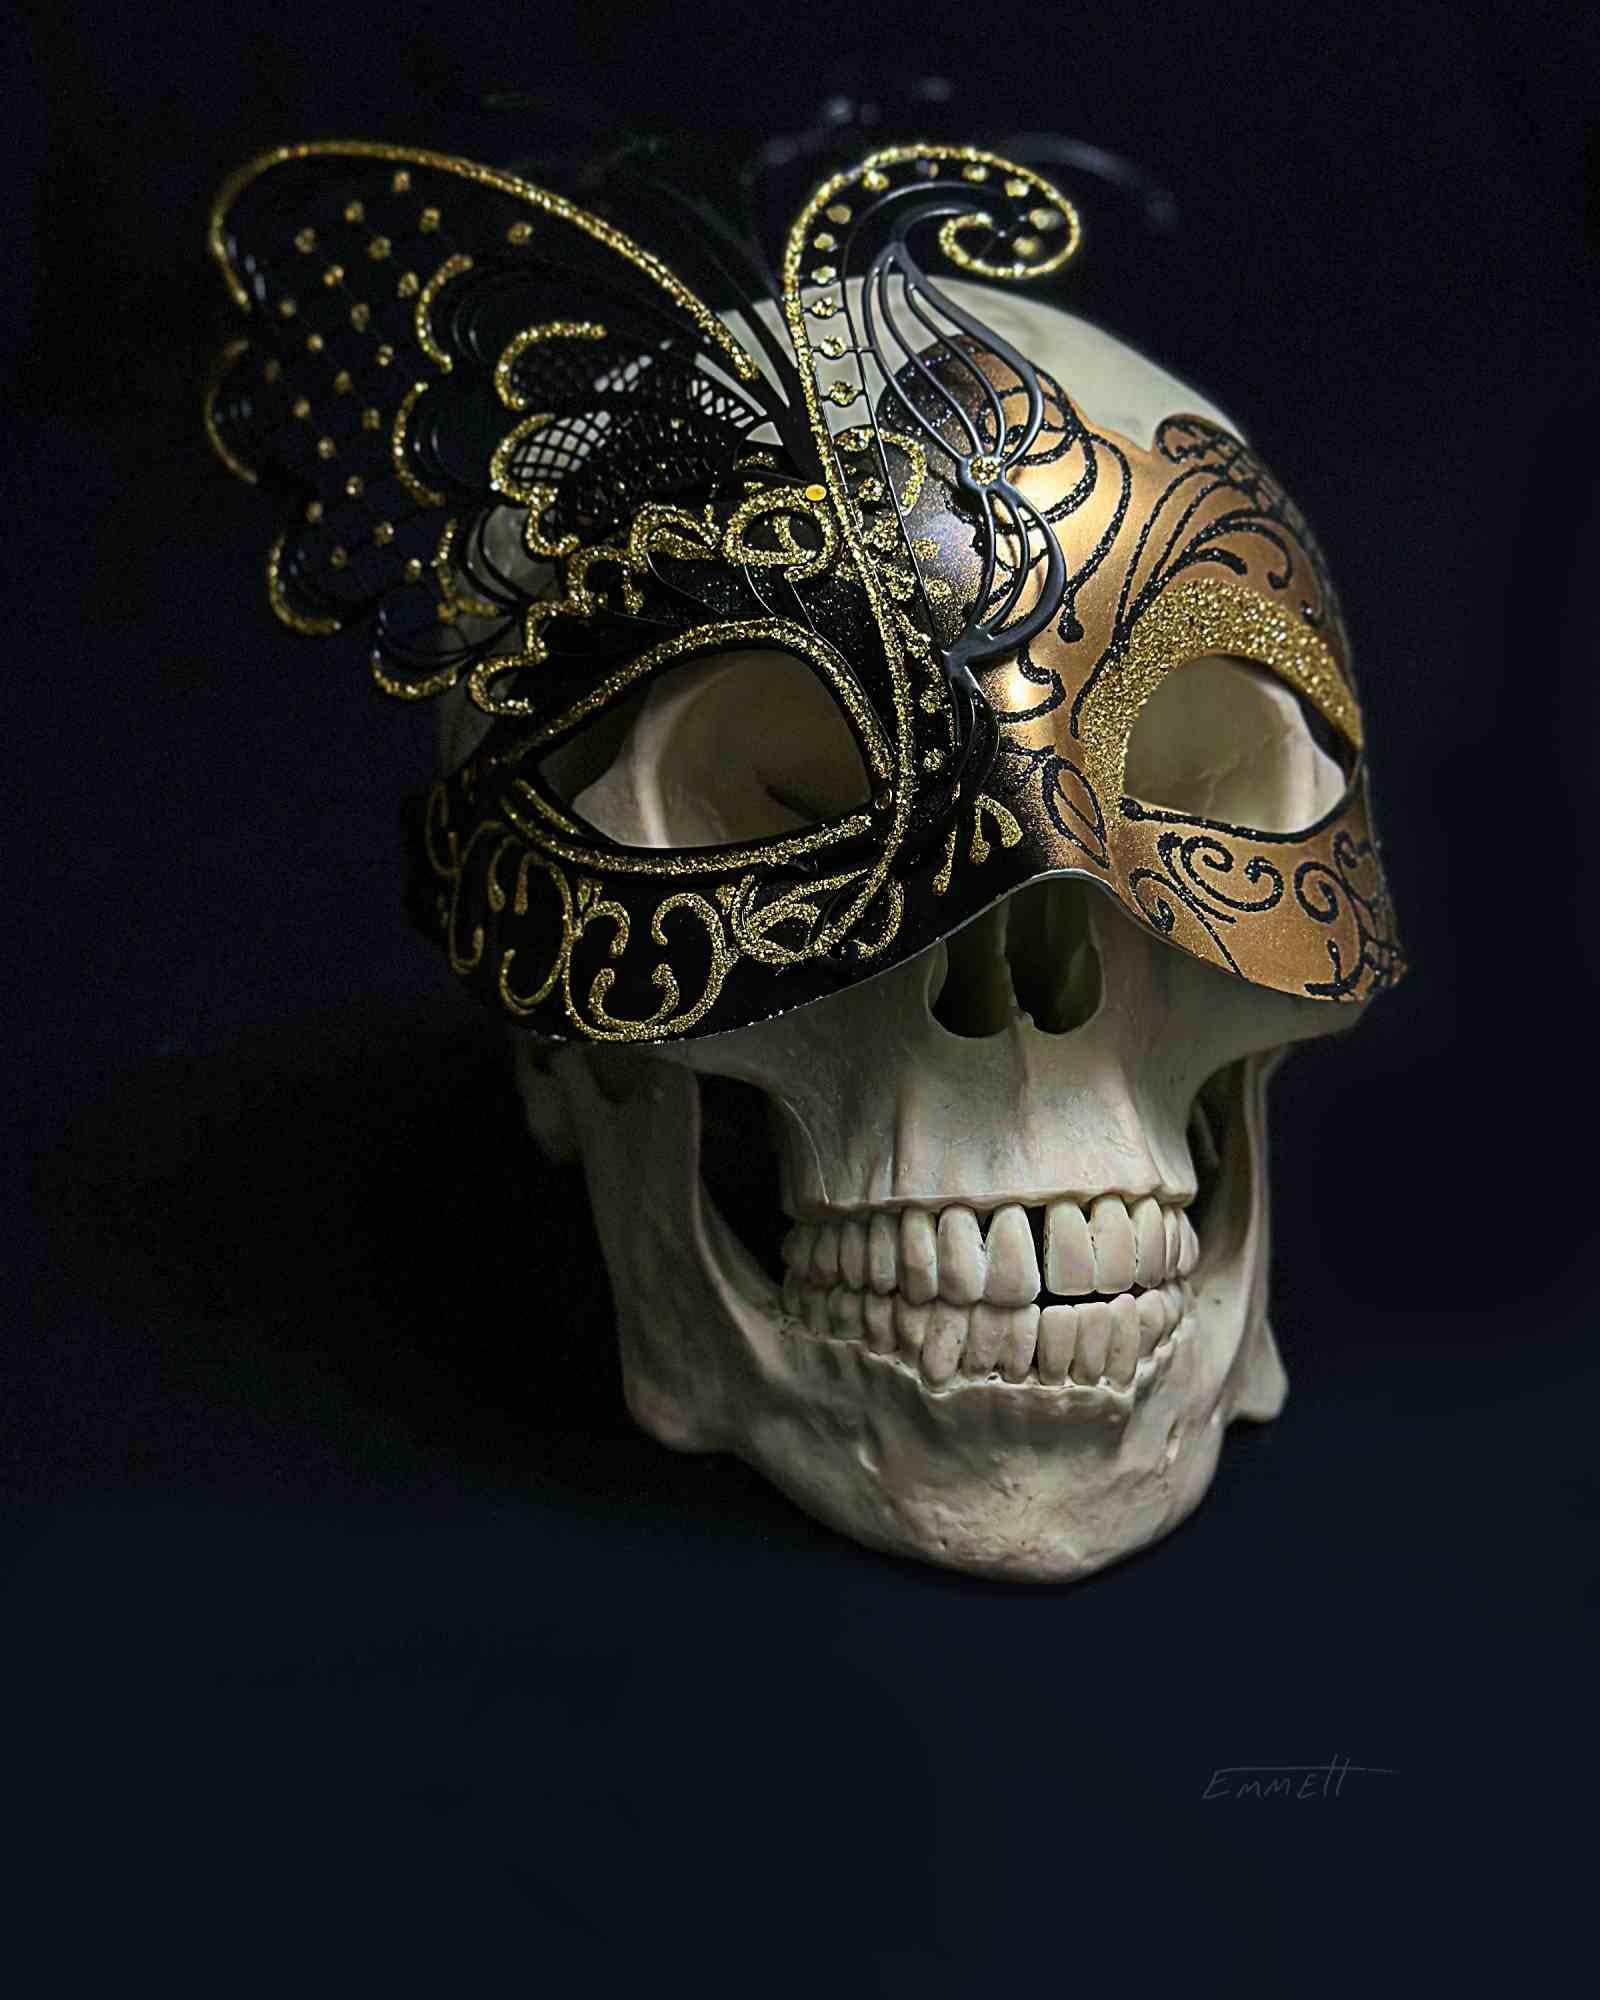 Photograph inspired by the history of the Aztec culture using masks to portray their Gods during celebrations and ceremonies. In Aztec religion, Itzpapalotl (Obsidian Butterfly) is a death Goddess who ruled over Tamoanchan, the heavenly plane of